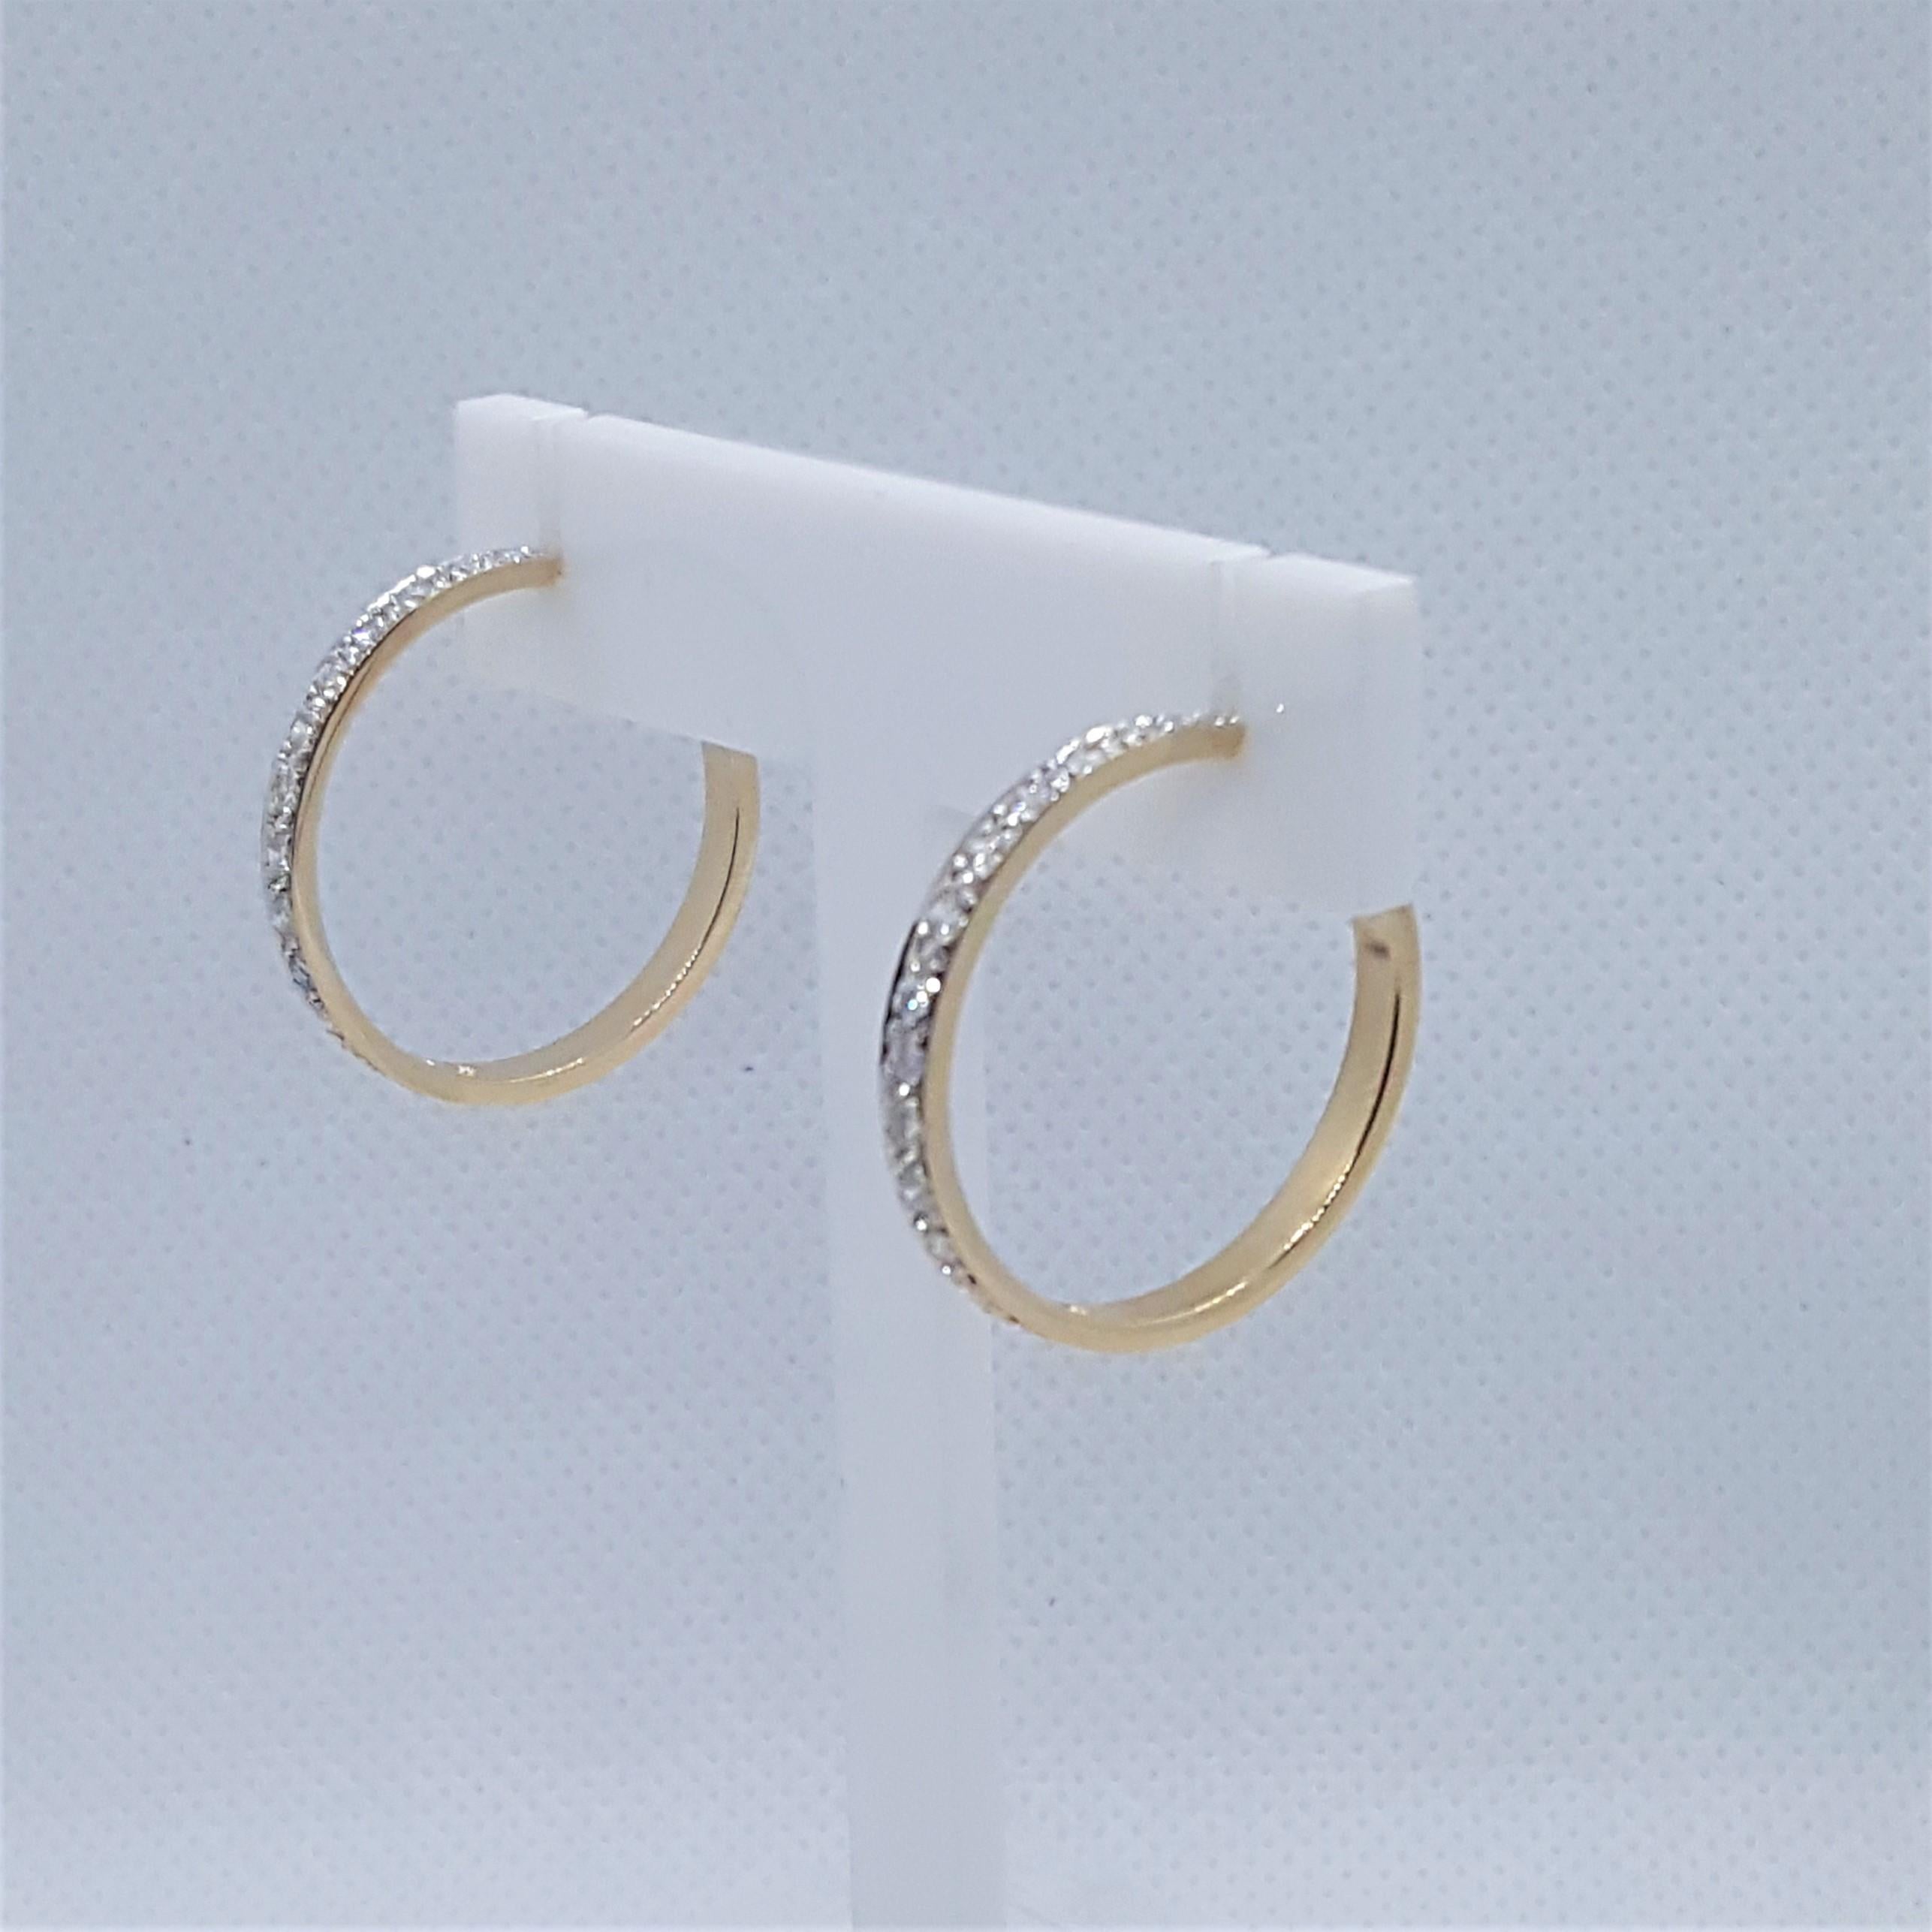 Timeless 14kt yellow gold friction post hoop earrings with 28 bead round brilliant diamonds that are g/h in color, SI in clarity, and approximately .30cttw. The hoops are 25mm in diameter and 3mm wide, weighing 6.2 grams.  The estimated time period